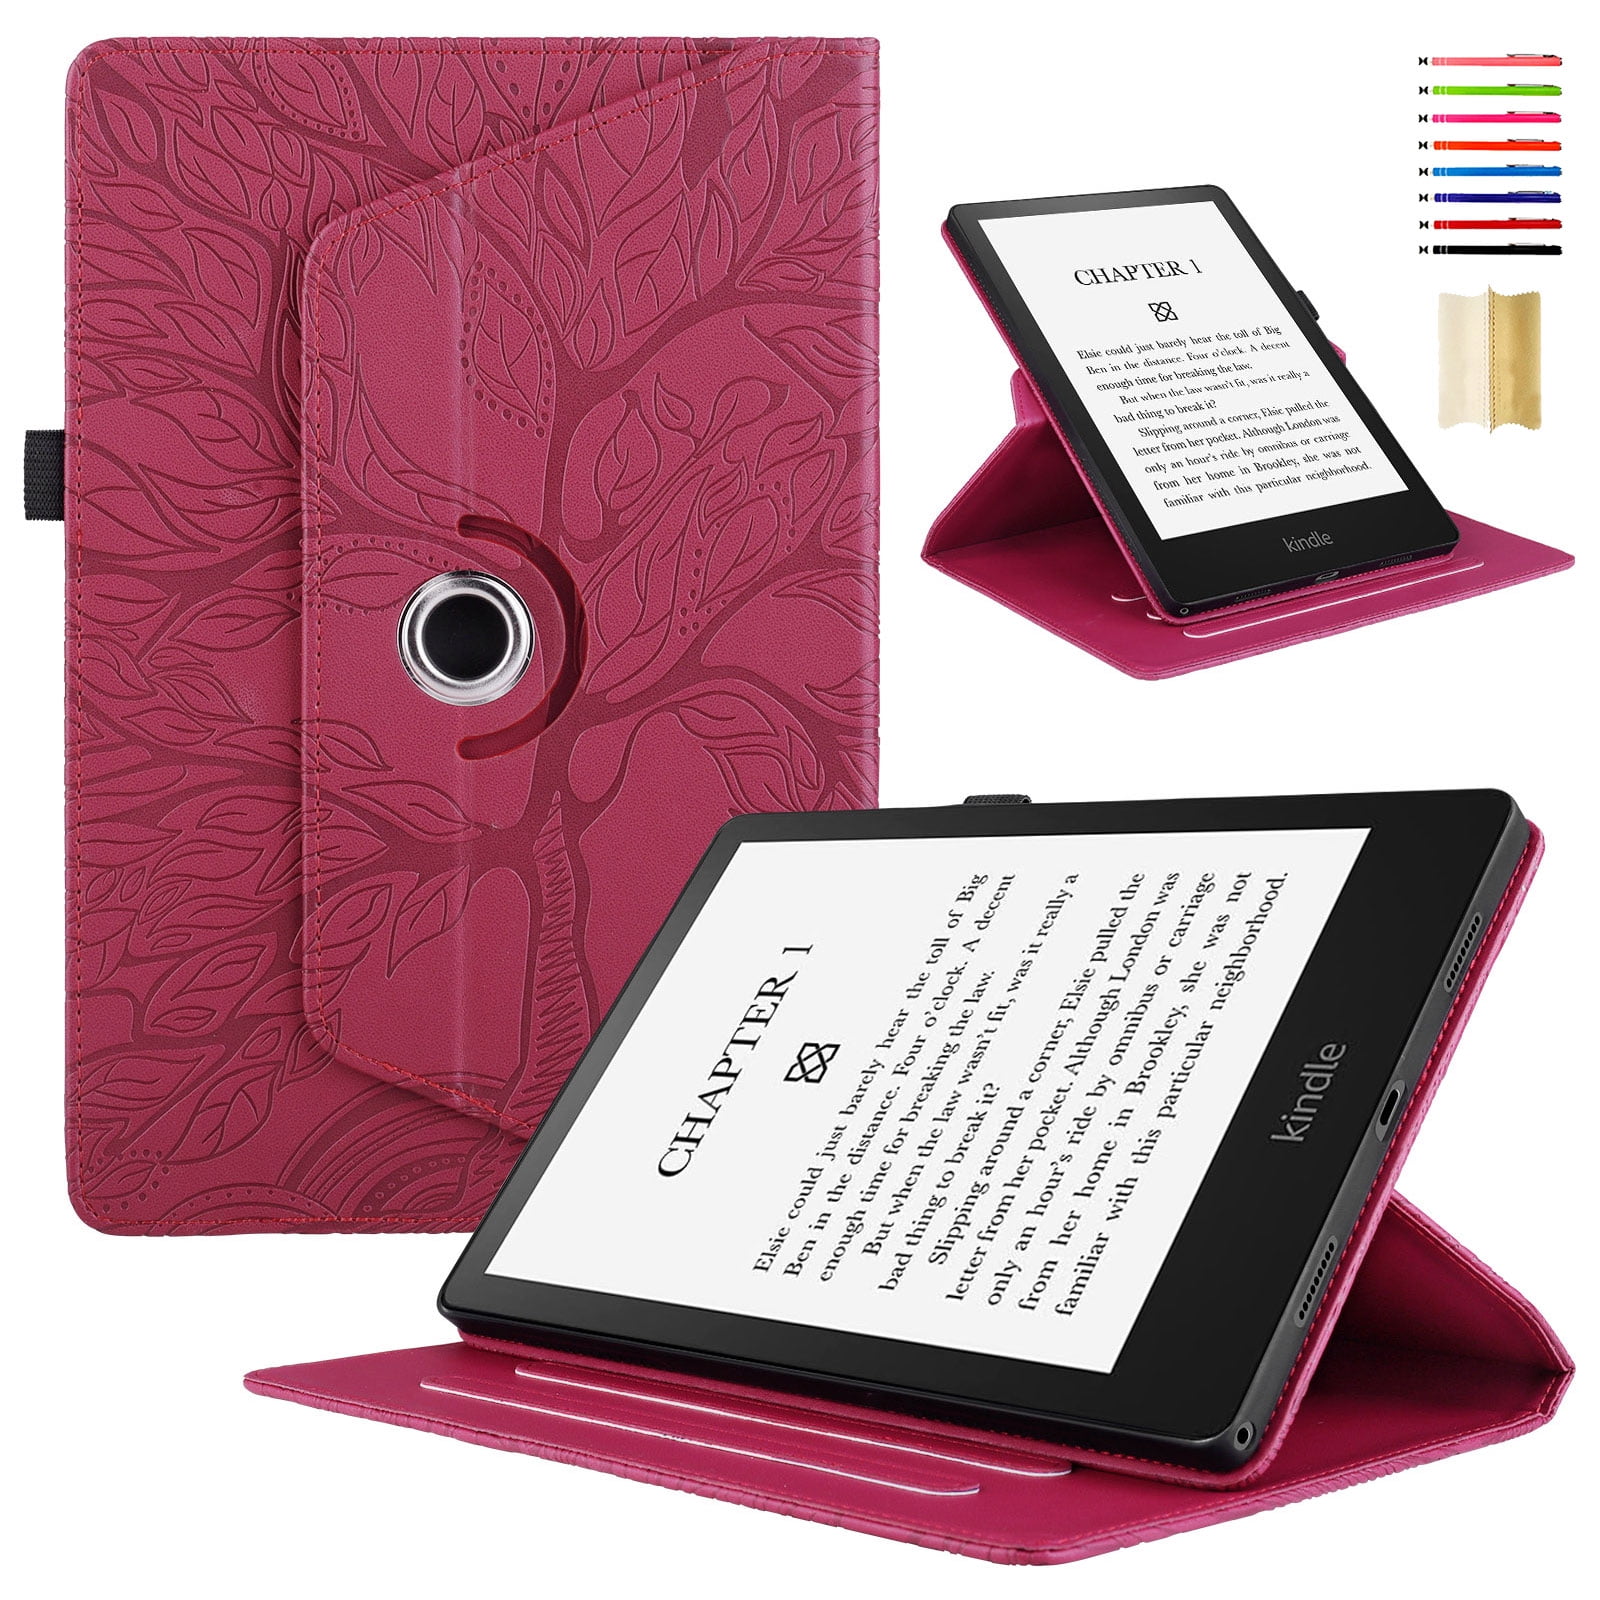 ELEHOLD Case for Kindle Paperwhite 6 Inch with Auto Wake Sleep